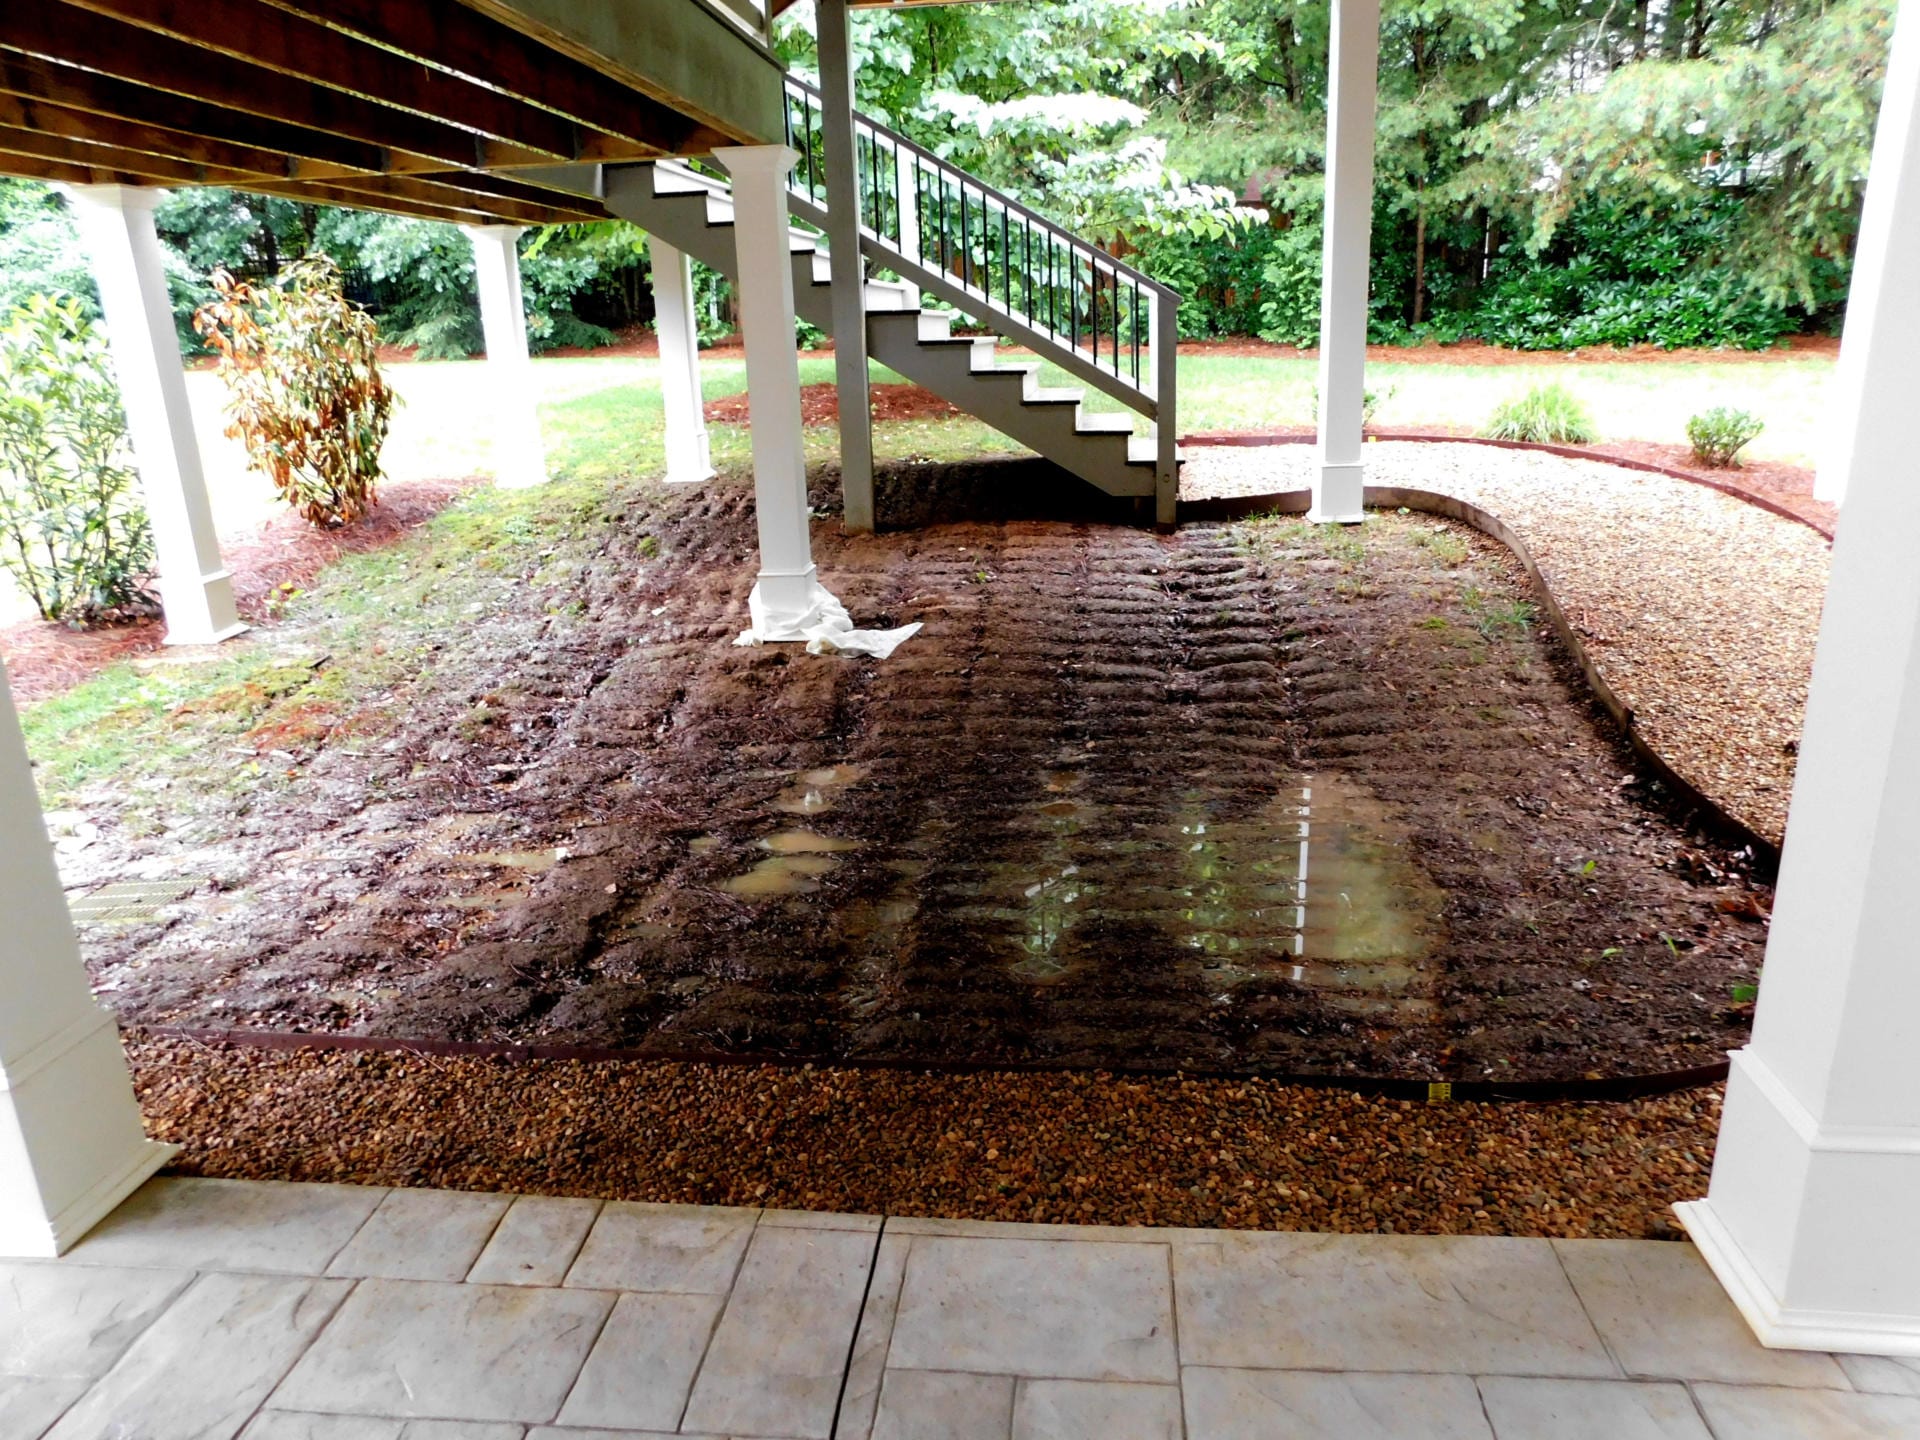 Green Solutions For Erosion Control, Landscape Fabric To Prevent Erosion